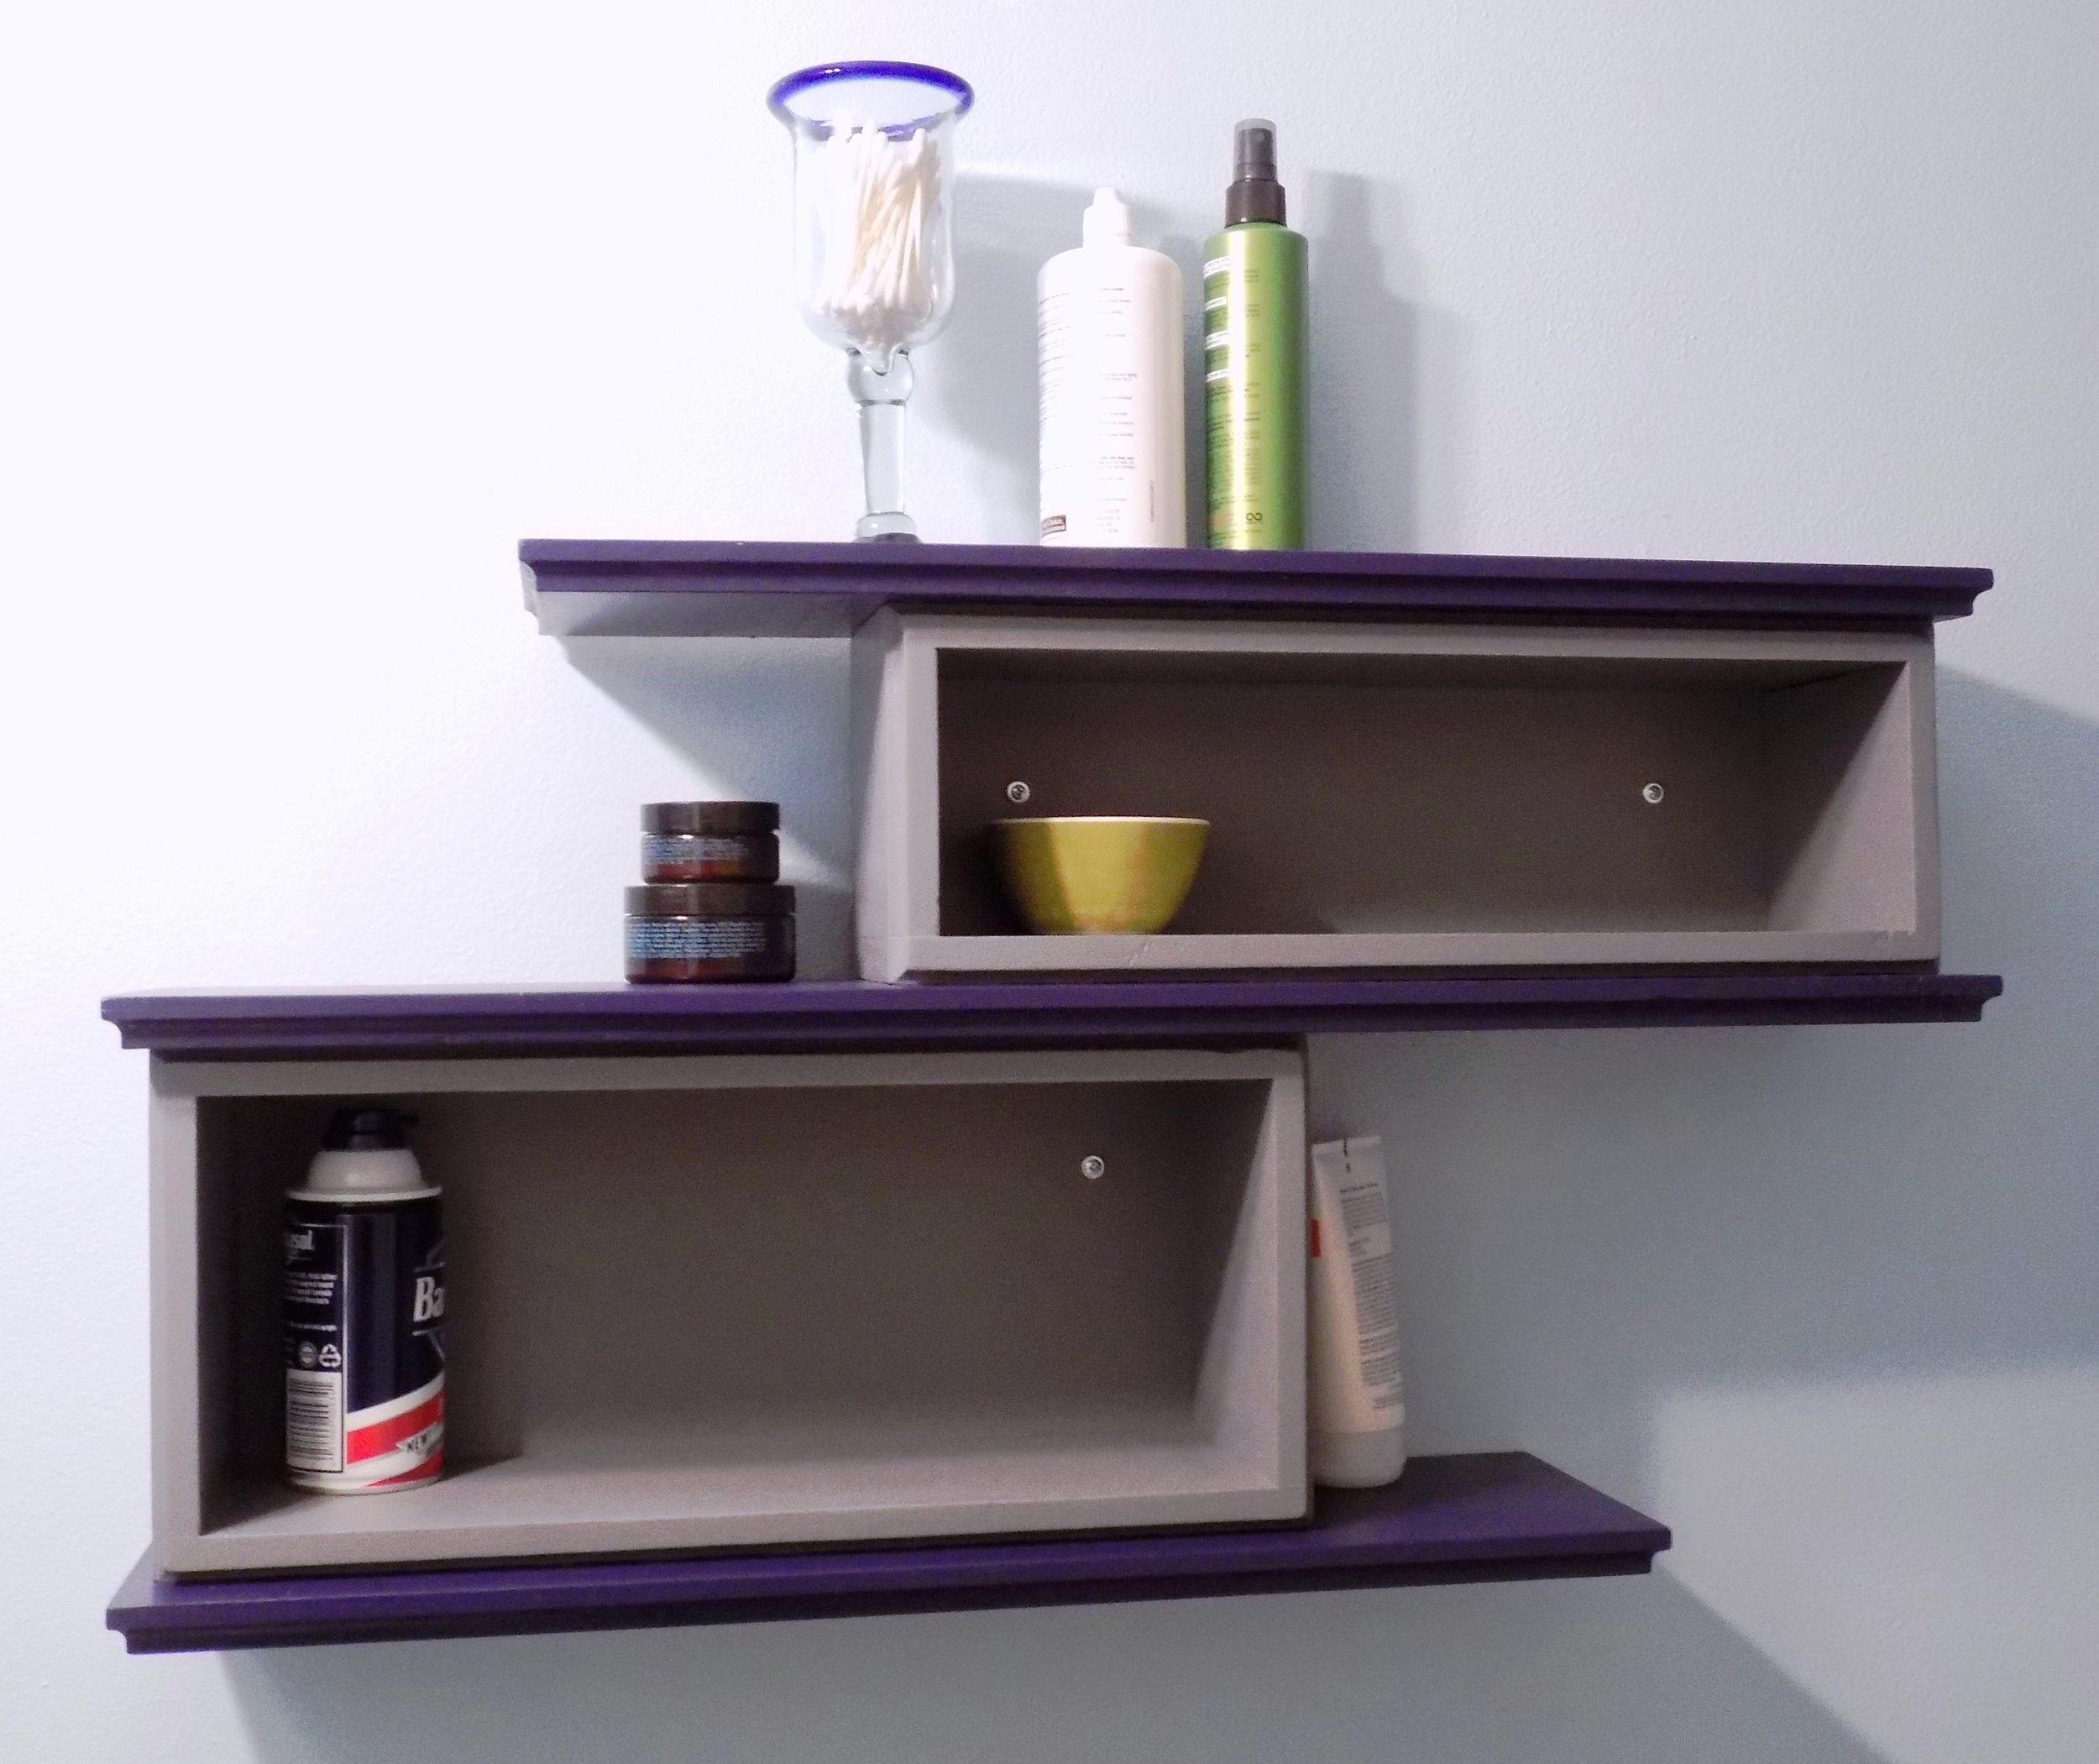  A great wall shelf for the bathroom!  30wX16hX6.5d shown here. 